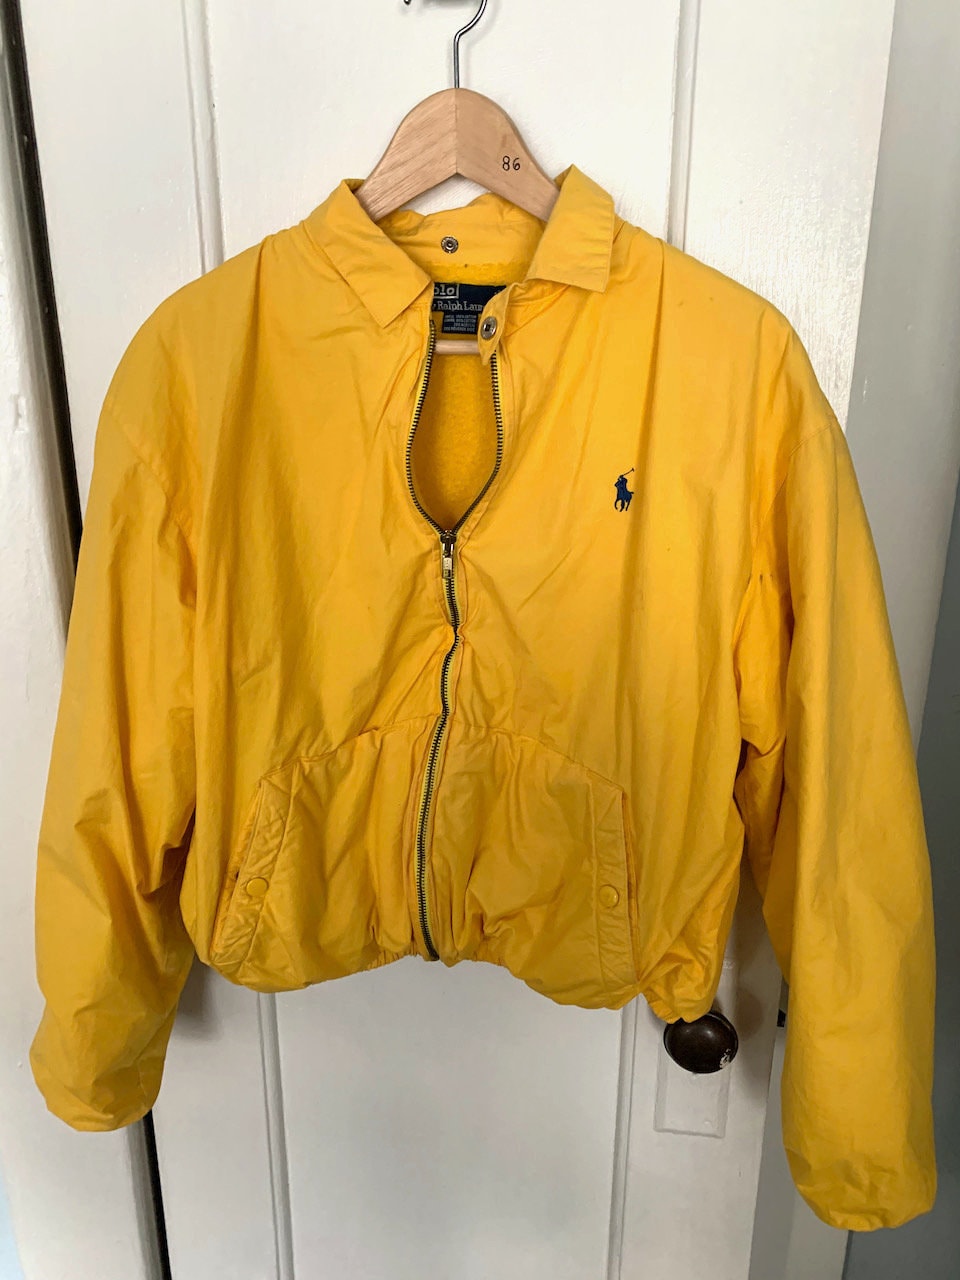 Vintage Polo Ralph Lauren Jacket Made in Hong Kong / Yellow - Etsy